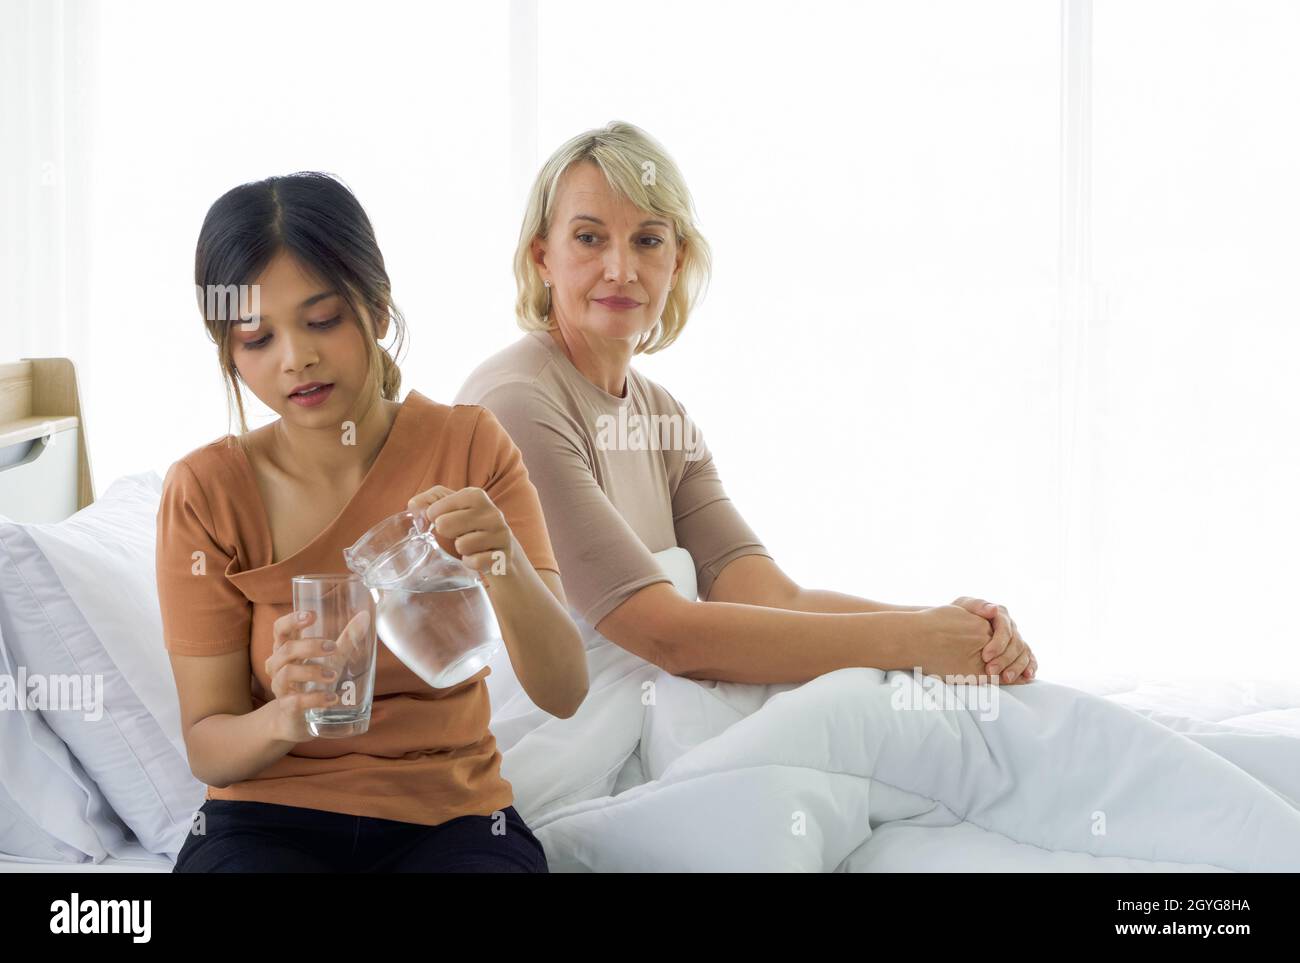 Asian daughter pour water into a glass for her adopted caucasian mother. Concept of love and sharing time of family, mother or daughter in law. Stock Photo